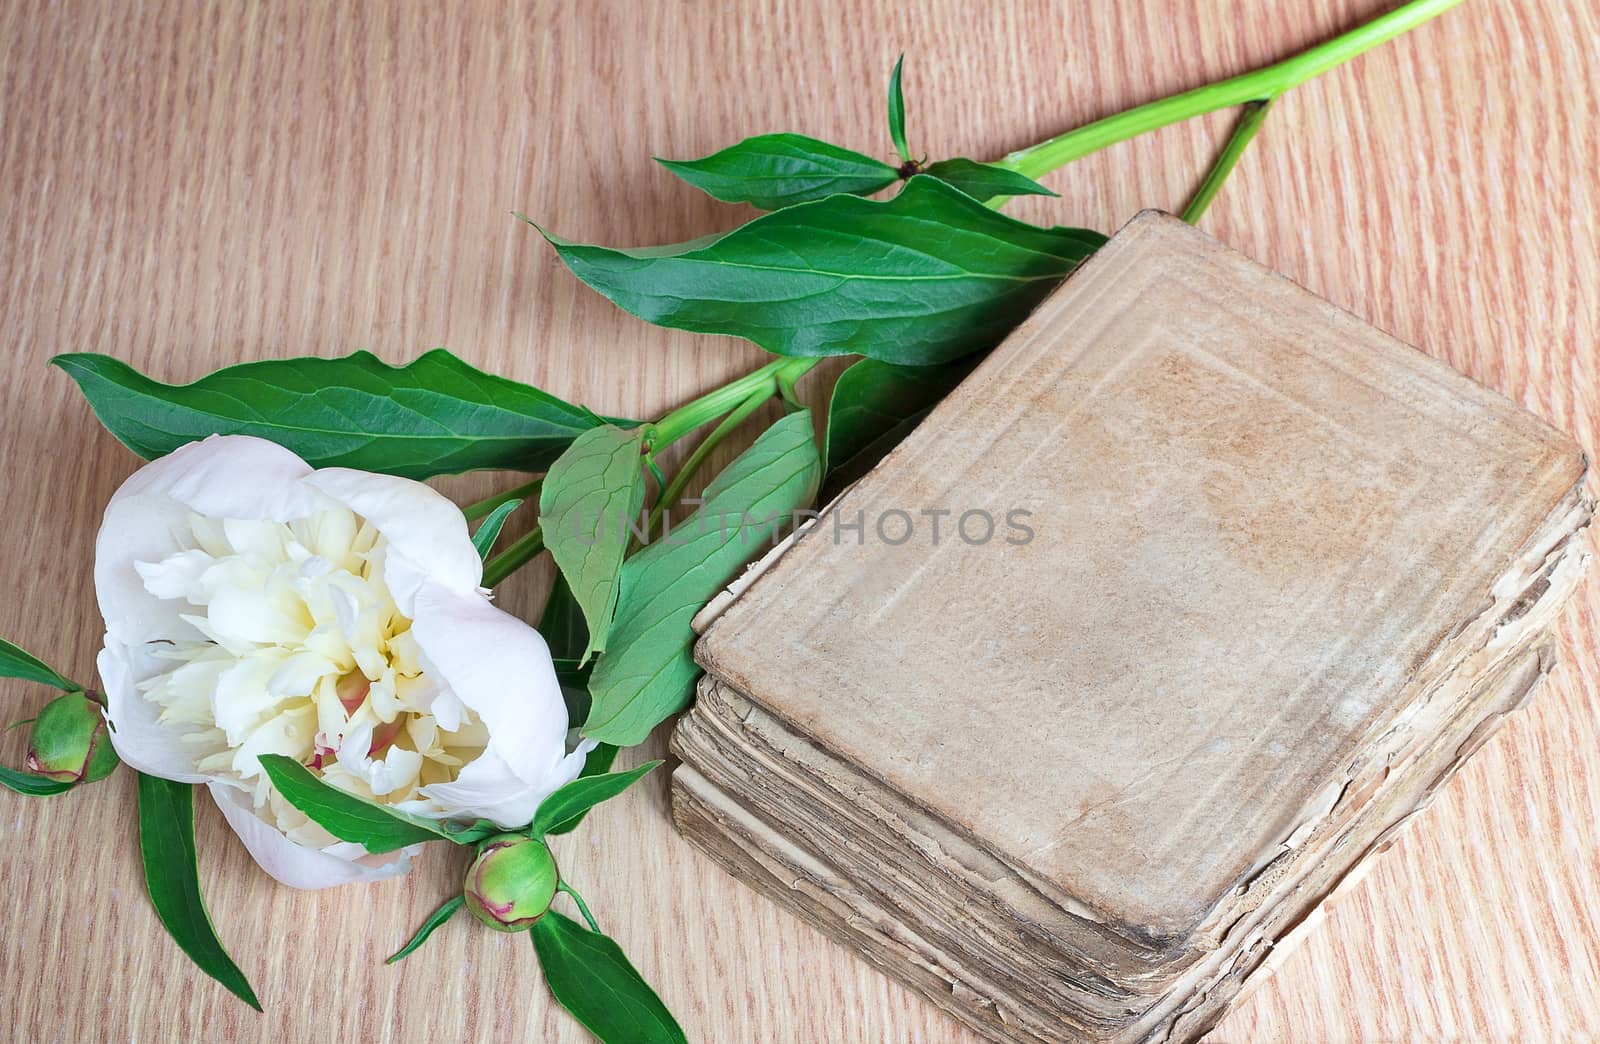 On a surface of a table there are a beautiful white flower of a peony and the ancient book.